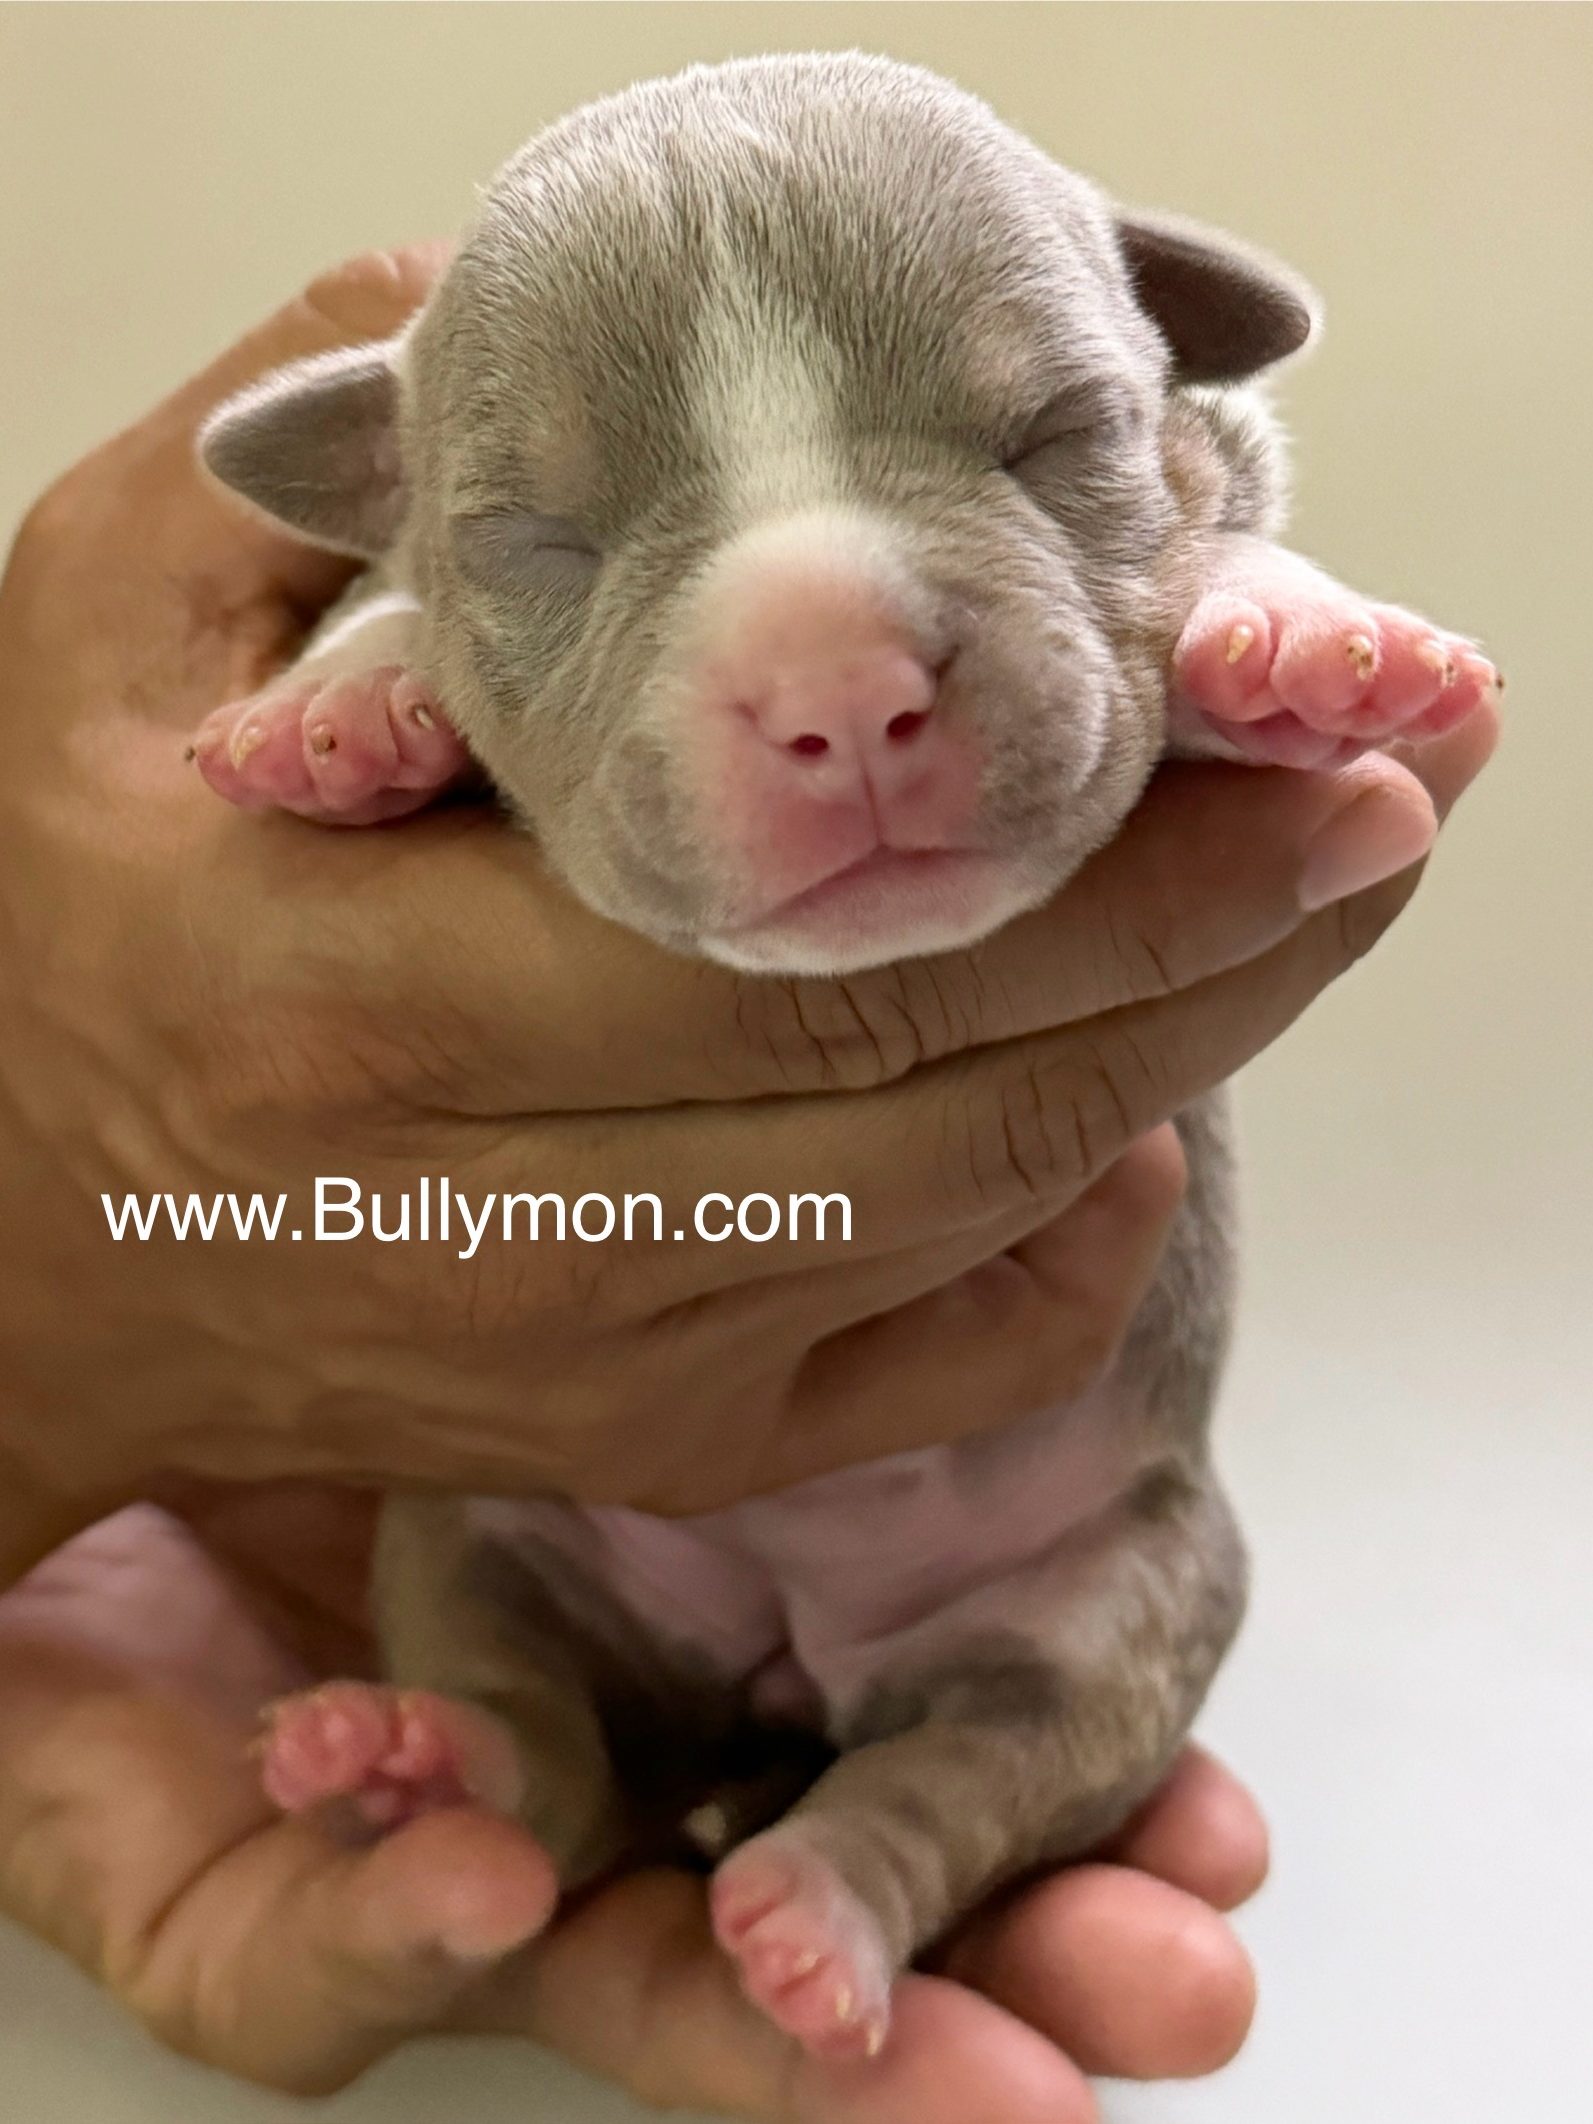 StarDust - Miniature, Pocket and Exotic Bully Puppy and Dog For Sale, Bullymon